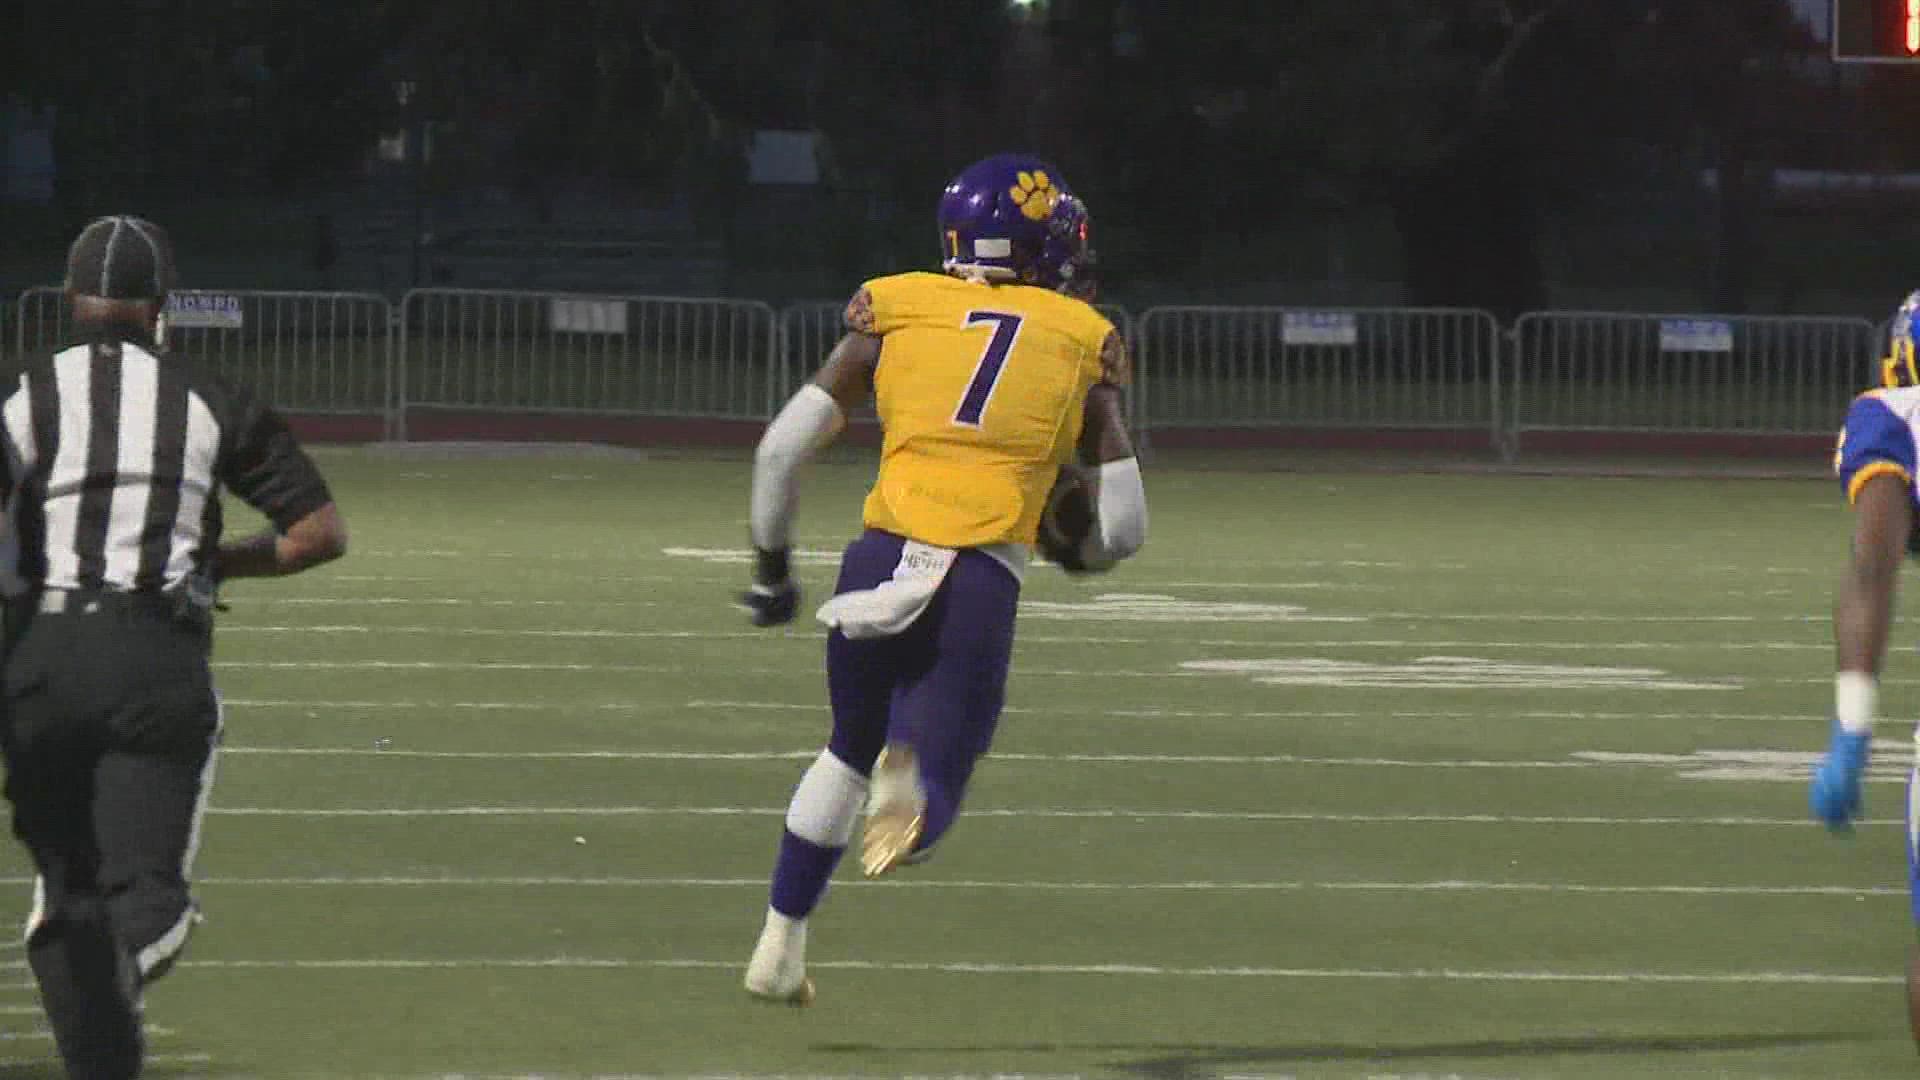 Its Karr's first season in Class 5A